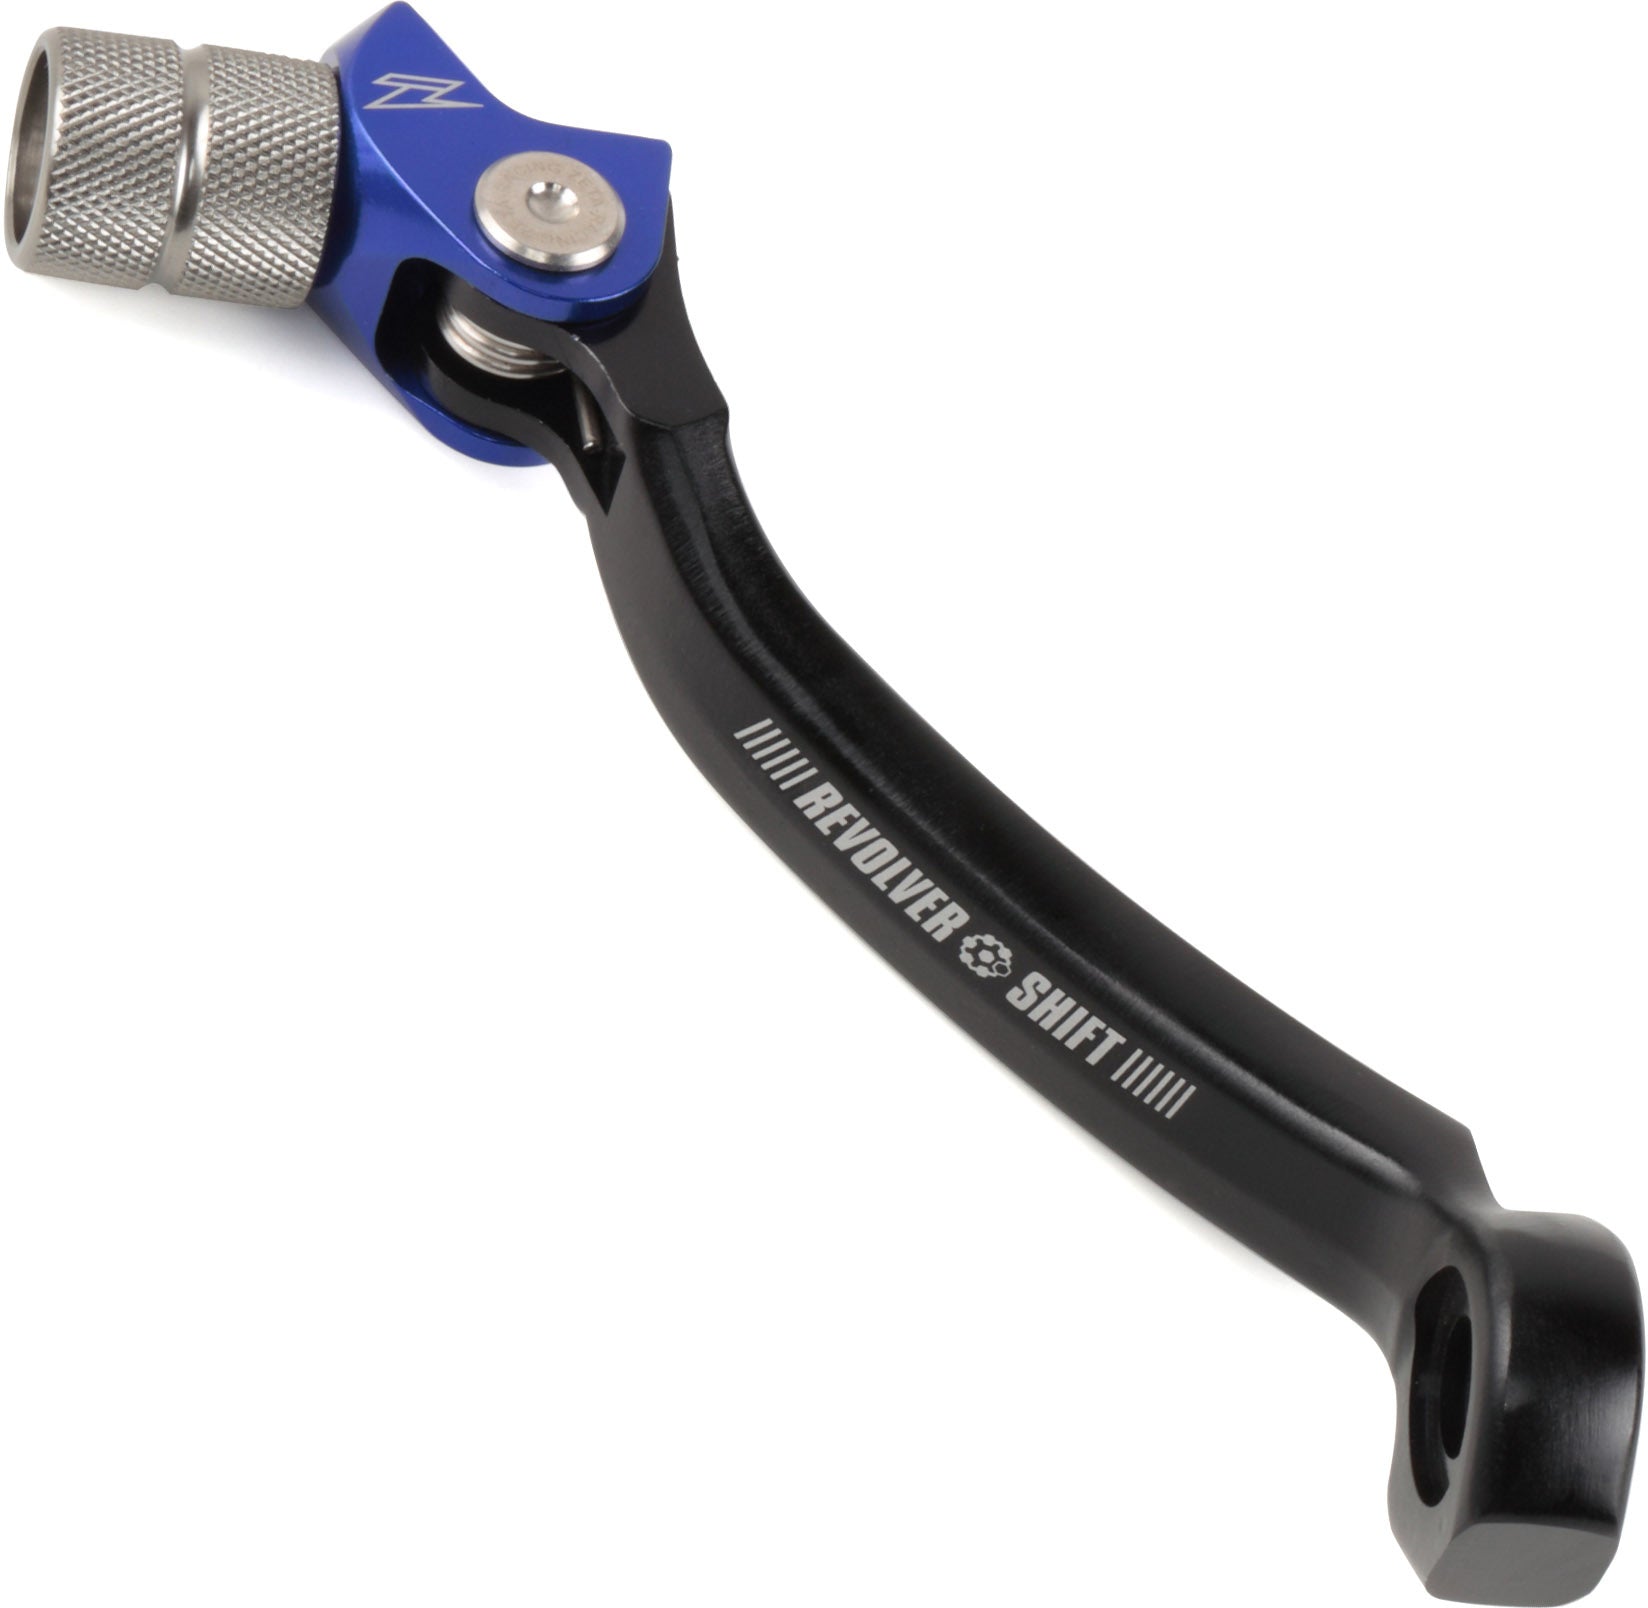 Forged Shift Lever for Husky TC125/TE150 17-22 in Blue